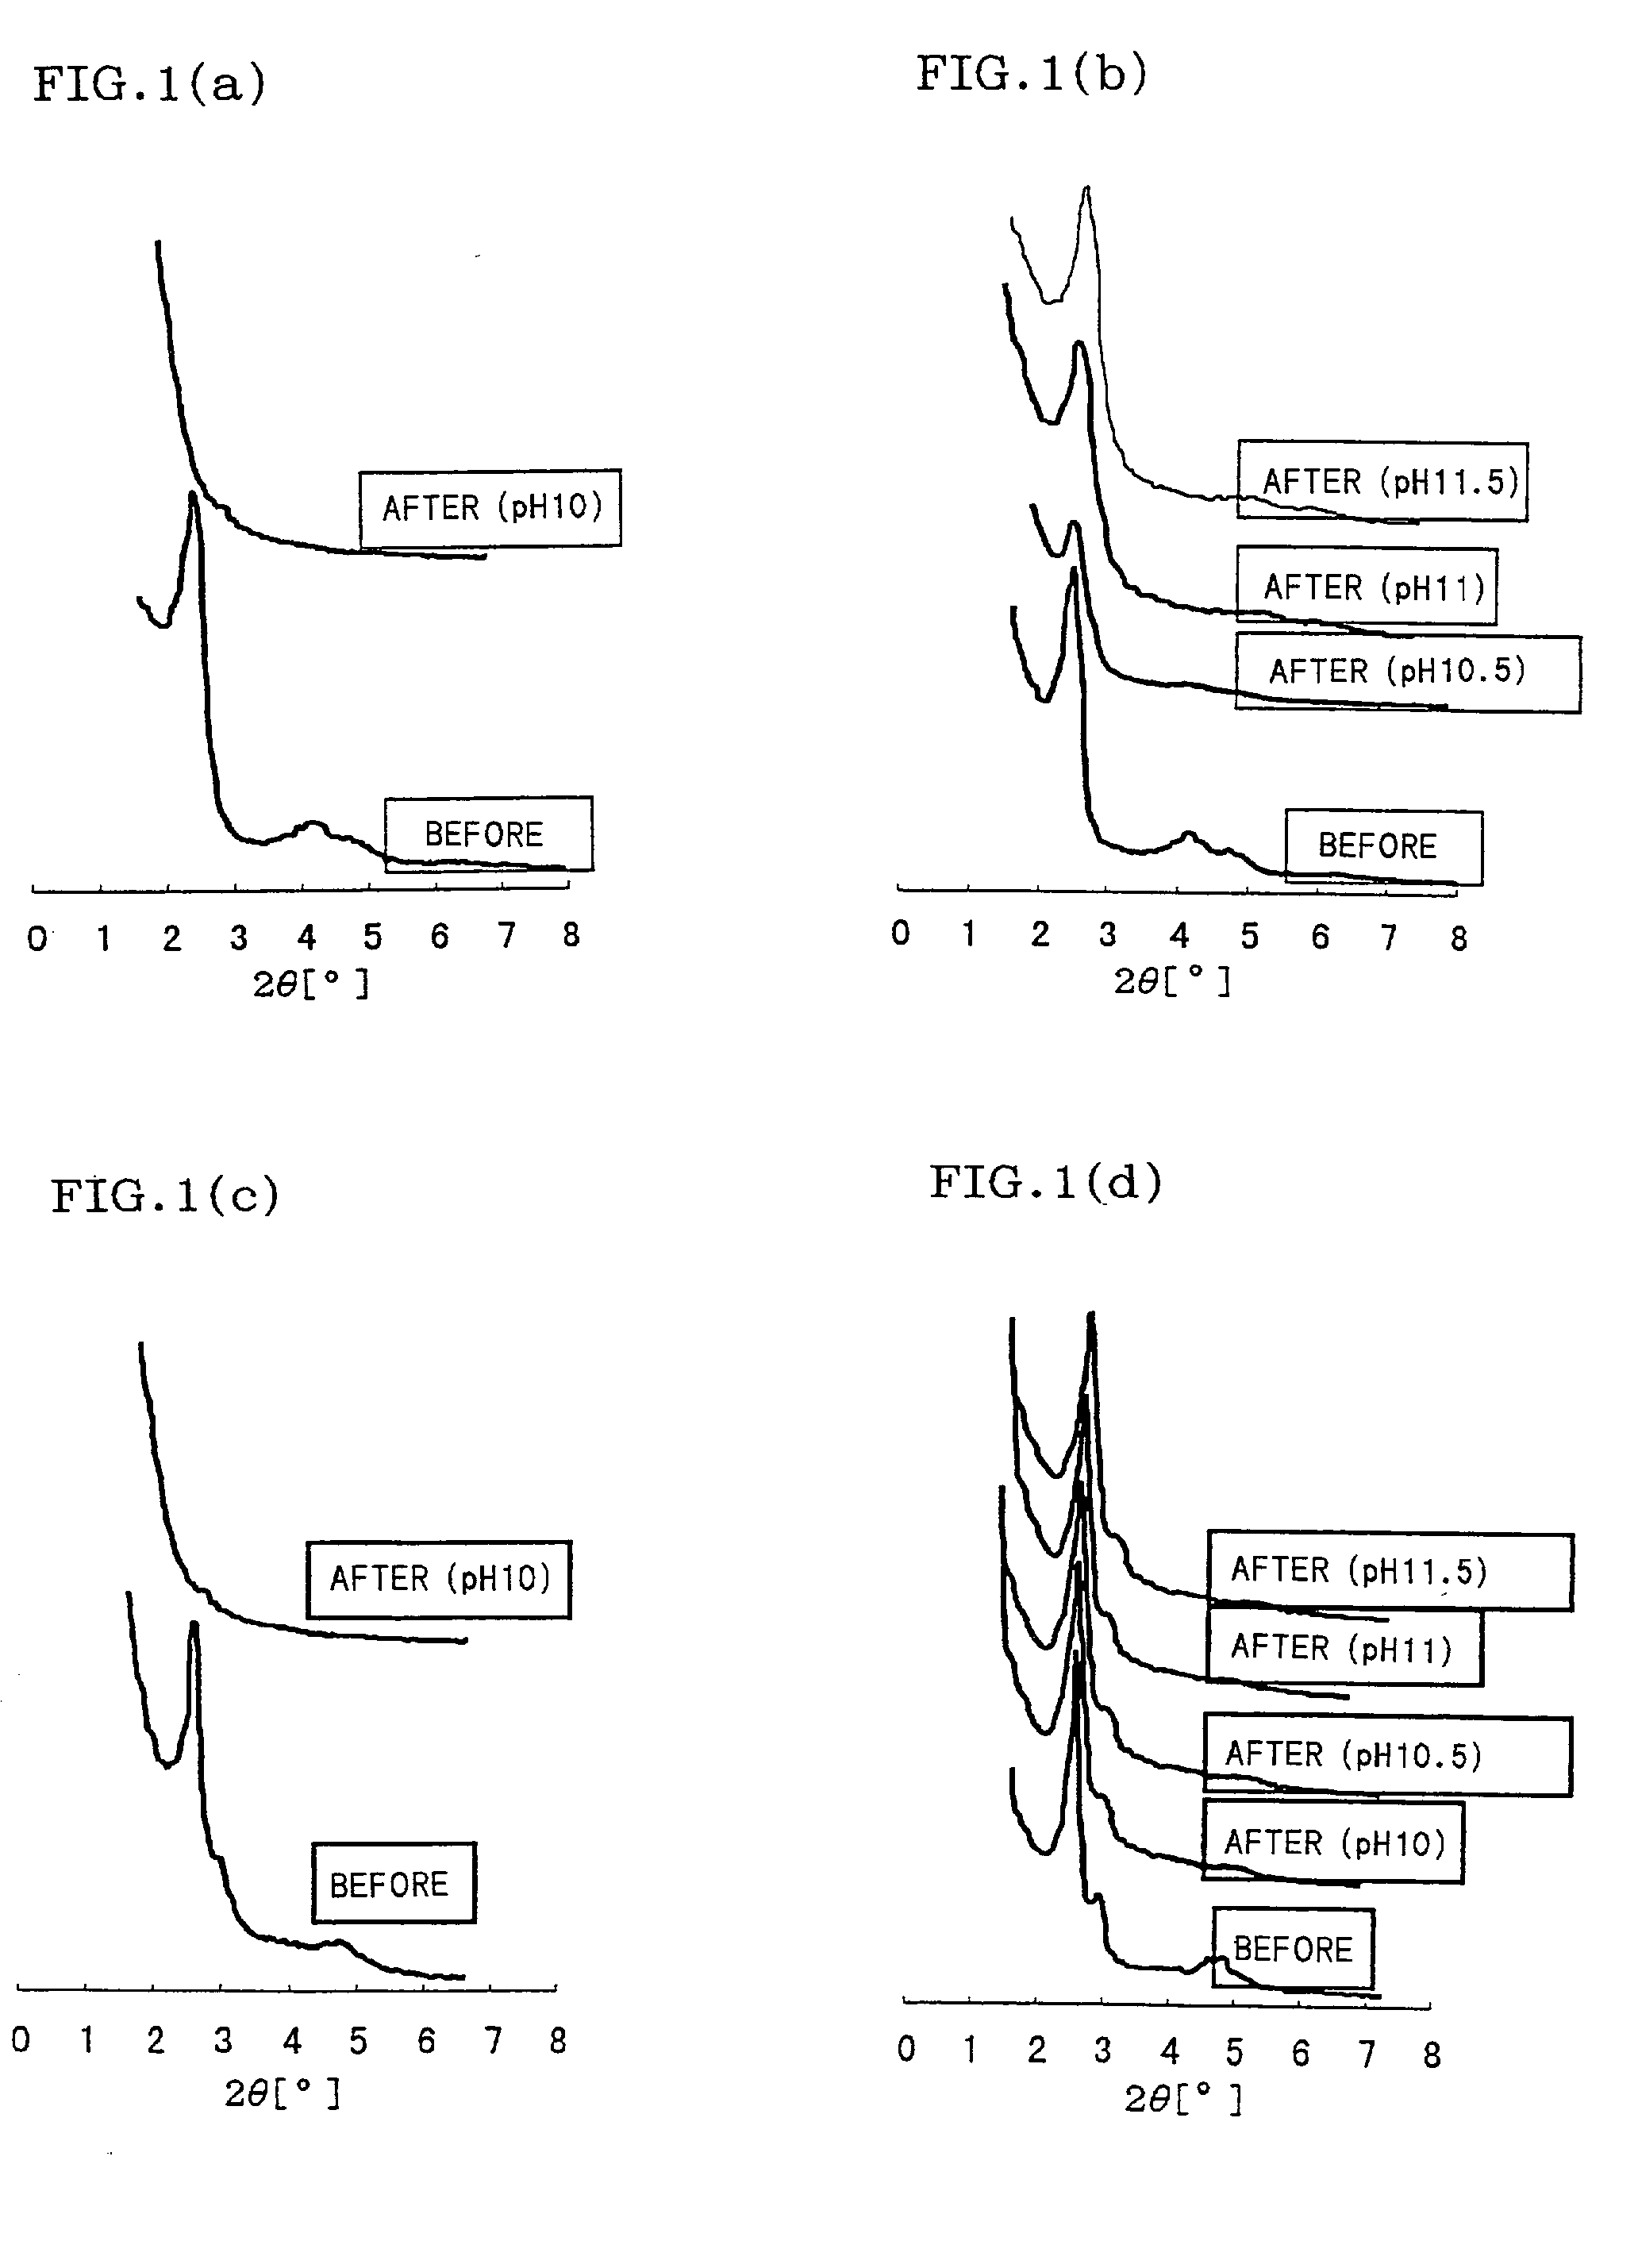 Mesoporous silica, mesoporous silica composite material, and processes for production thereof